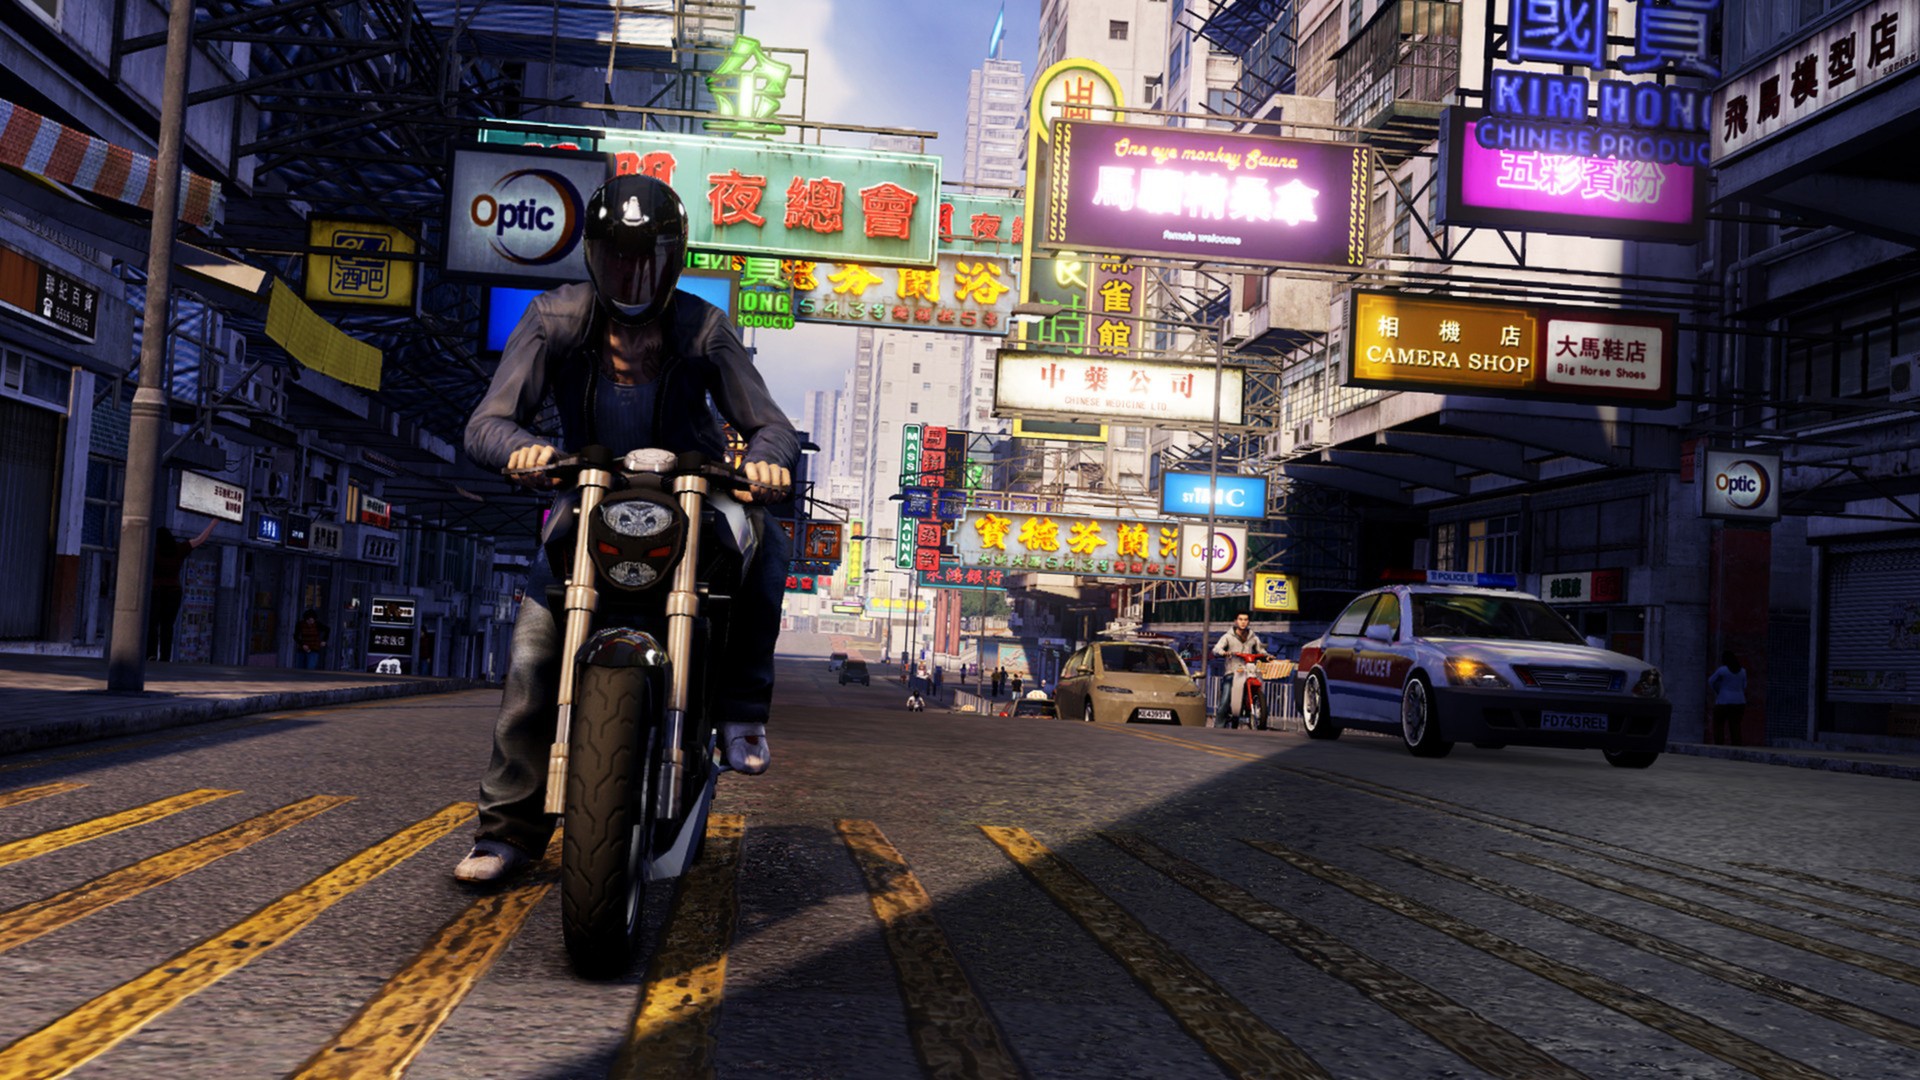 Sleeping Dogs: Martial Arts Pack no Steam